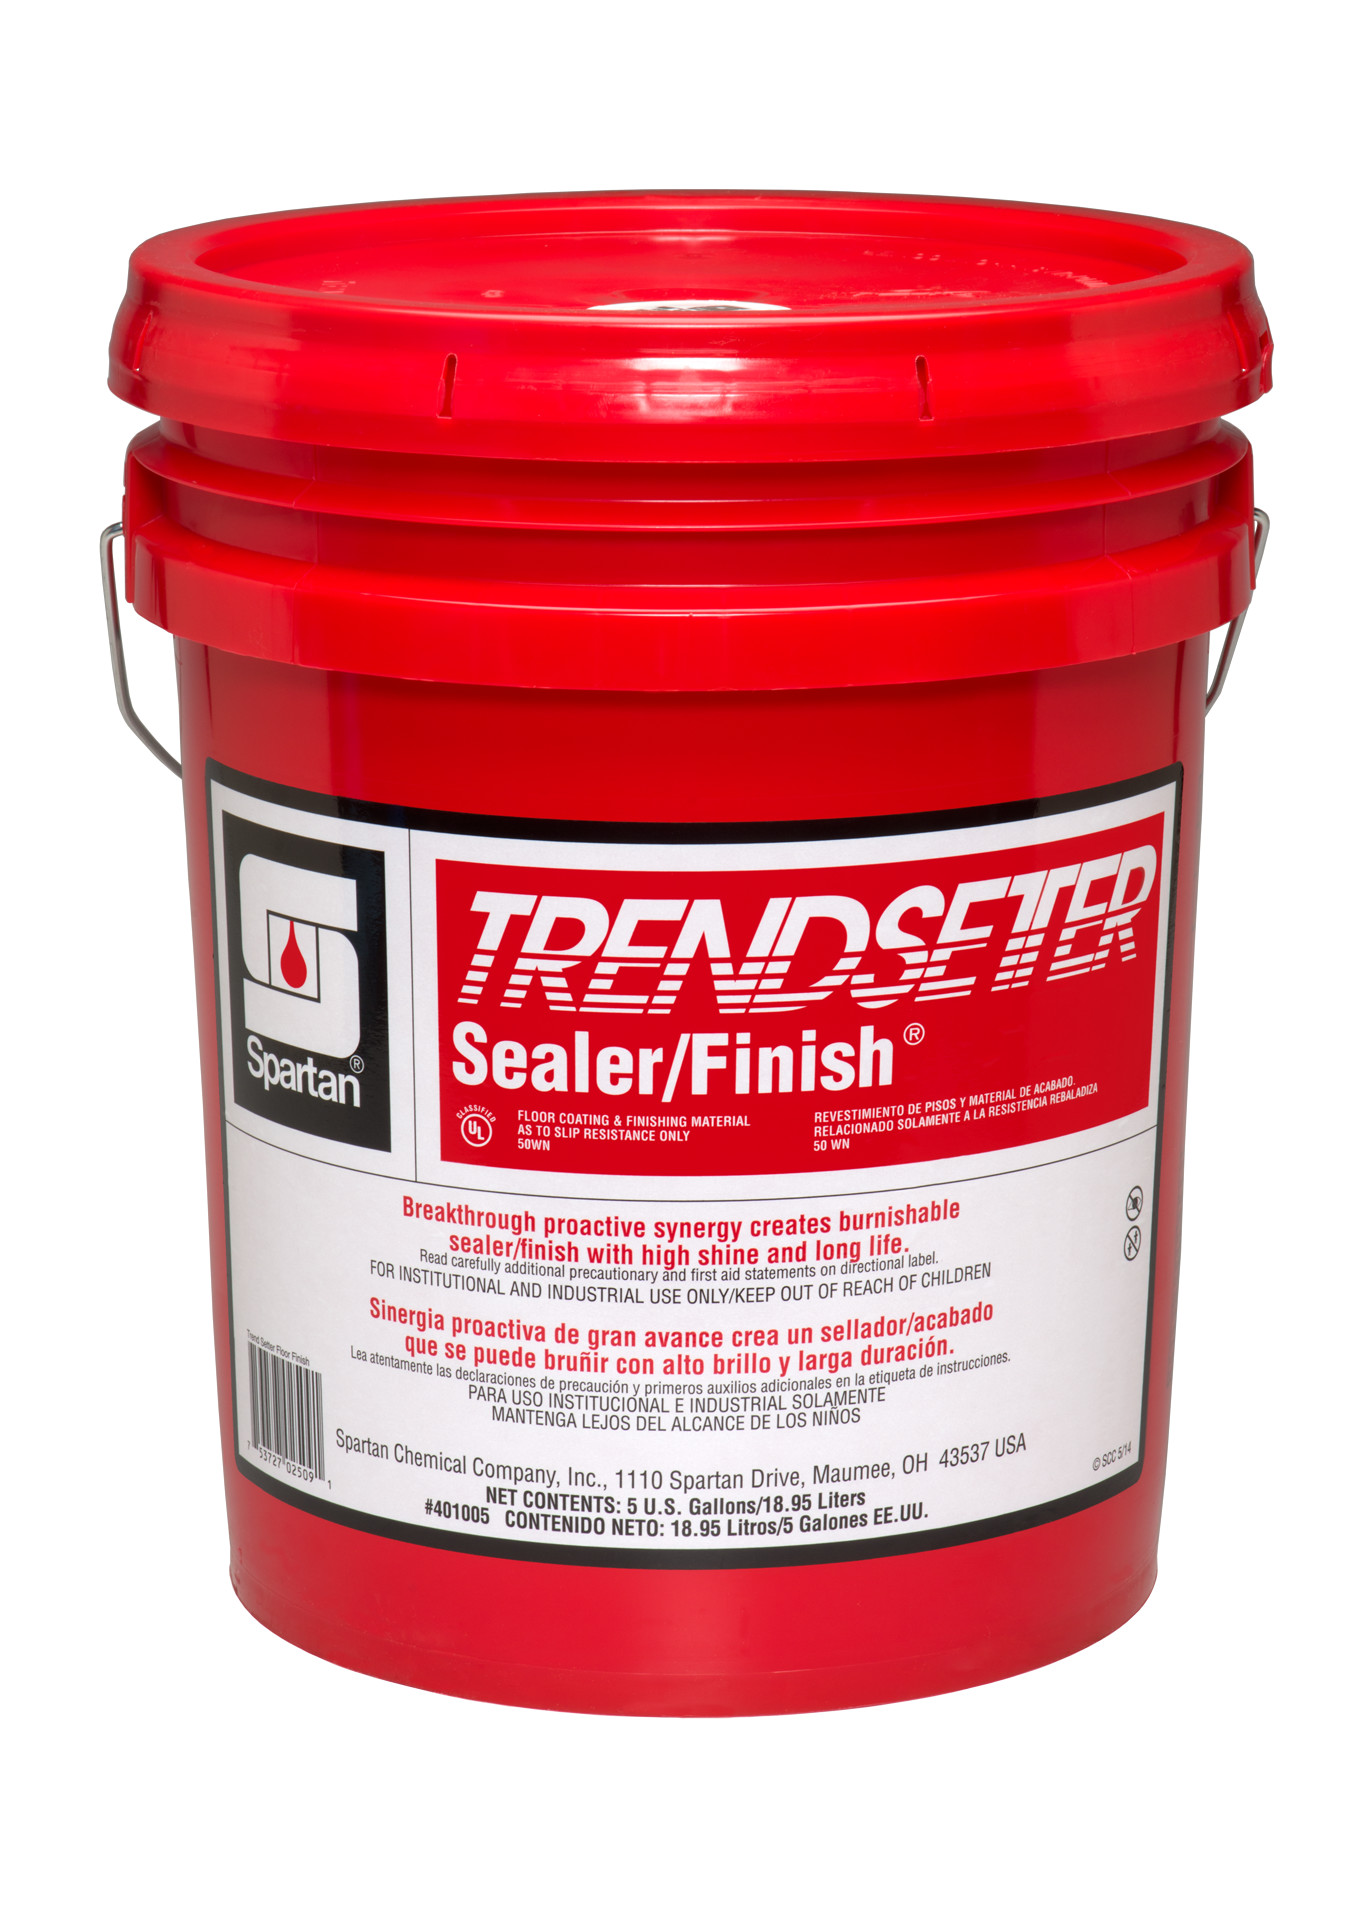 Spartan Chemical Company Trendsetter Sealer/Finish, 5 GAL PAIL